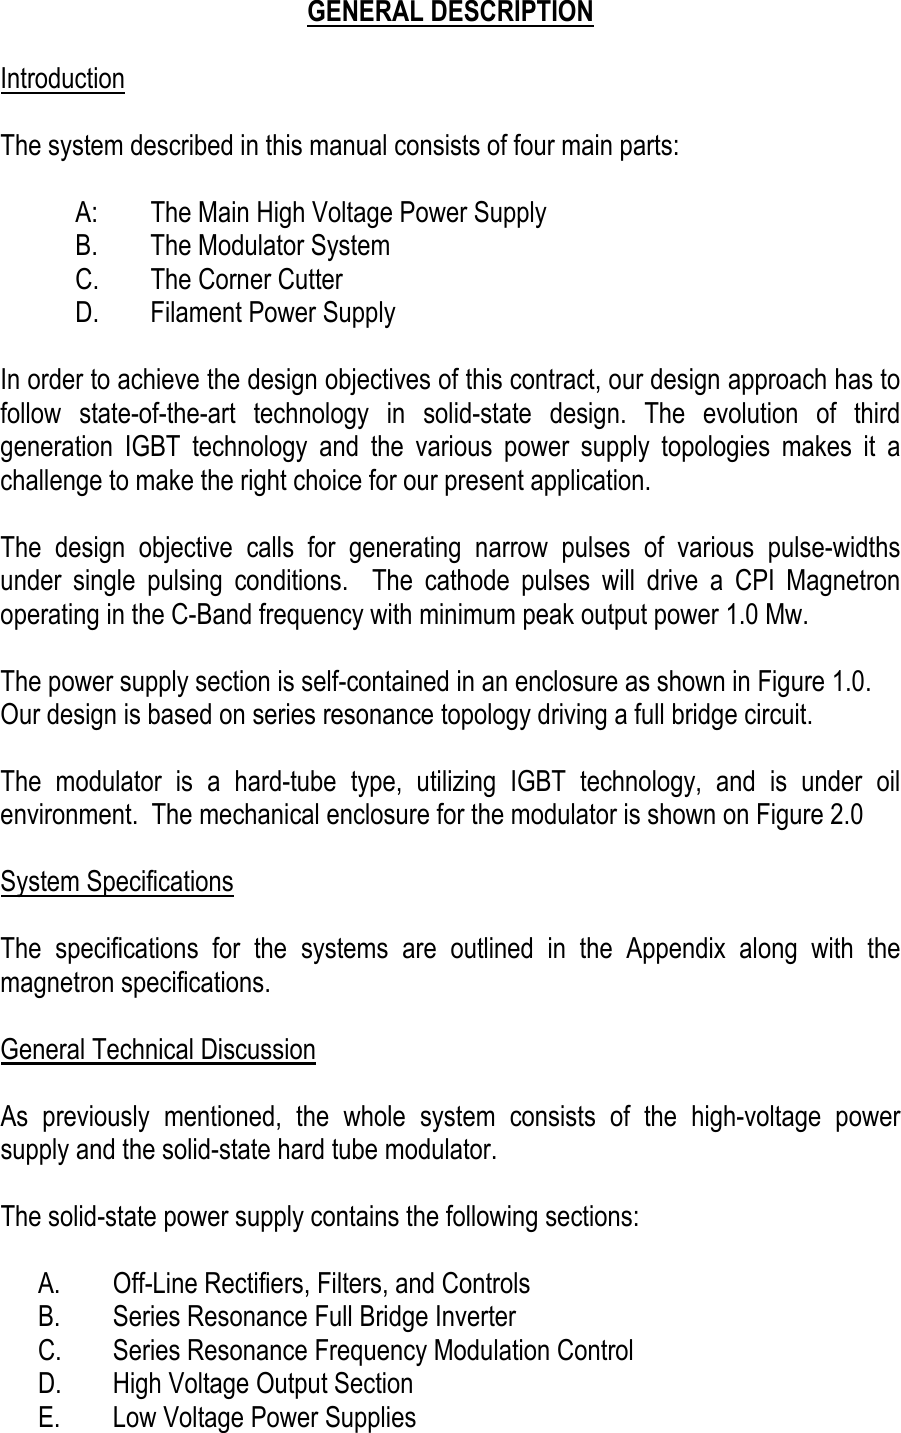    GENERAL DESCRIPTION  Introduction  The system described in this manual consists of four main parts:  A:  The Main High Voltage Power Supply B.  The Modulator System C.  The Corner Cutter D.  Filament Power Supply  In order to achieve the design objectives of this contract, our design approach has to follow state-of-the-art technology in solid-state design. The evolution of third generation IGBT technology and the various power supply topologies makes it a challenge to make the right choice for our present application.  The design objective calls for generating narrow pulses of various pulse-widths under single pulsing conditions.  The cathode pulses will drive a CPI Magnetron operating in the C-Band frequency with minimum peak output power 1.0 Mw.  The power supply section is self-contained in an enclosure as shown in Figure 1.0.   Our design is based on series resonance topology driving a full bridge circuit.  The modulator is a hard-tube type, utilizing IGBT technology, and is under oil environment.  The mechanical enclosure for the modulator is shown on Figure 2.0  System Specifications  The specifications for the systems are outlined in the Appendix along with the magnetron specifications.  General Technical Discussion  As previously mentioned, the whole system consists of the high-voltage power supply and the solid-state hard tube modulator.  The solid-state power supply contains the following sections:  A.  Off-Line Rectifiers, Filters, and Controls B.  Series Resonance Full Bridge Inverter C.  Series Resonance Frequency Modulation Control D.  High Voltage Output Section E.  Low Voltage Power Supplies 